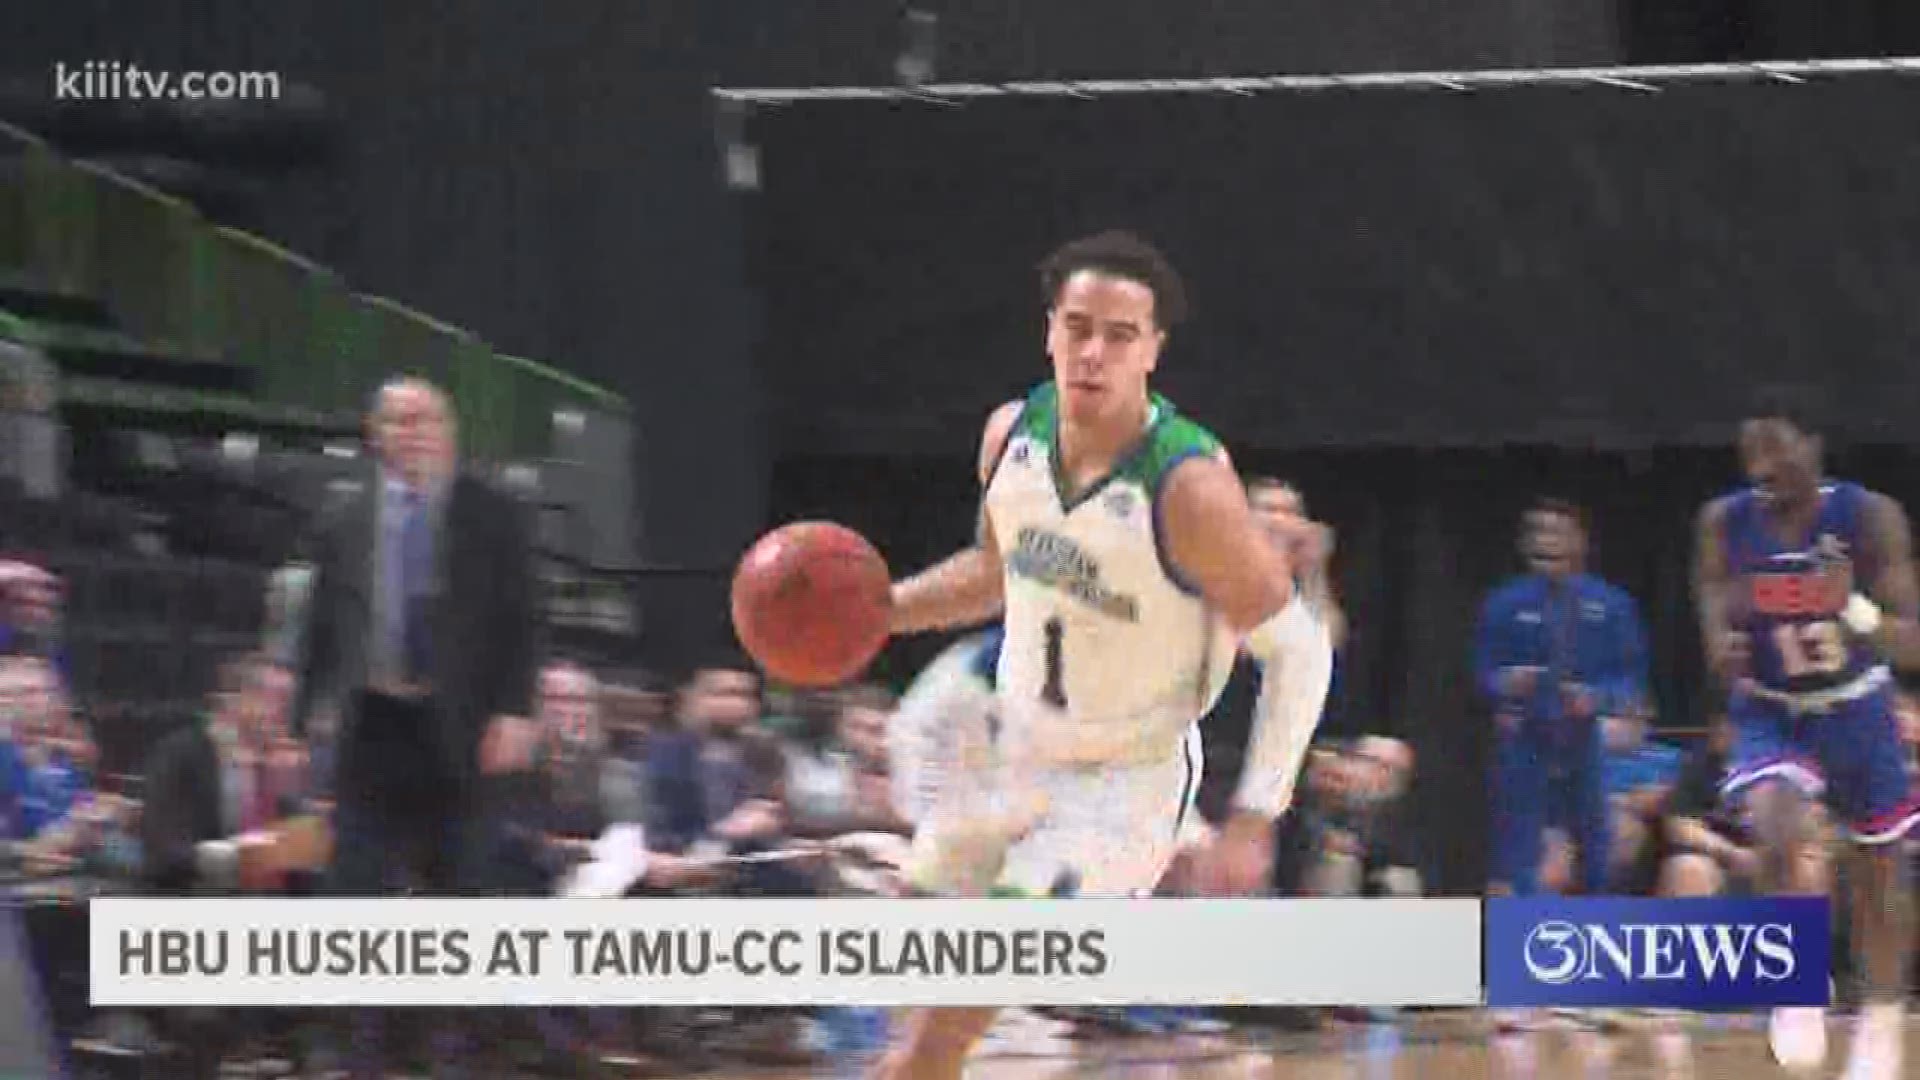 Texas A&M-Corpus Christi men's basketball topped Houston Baptist 84-78 clinching a berth into the 2020 Southland Conference Tournament.